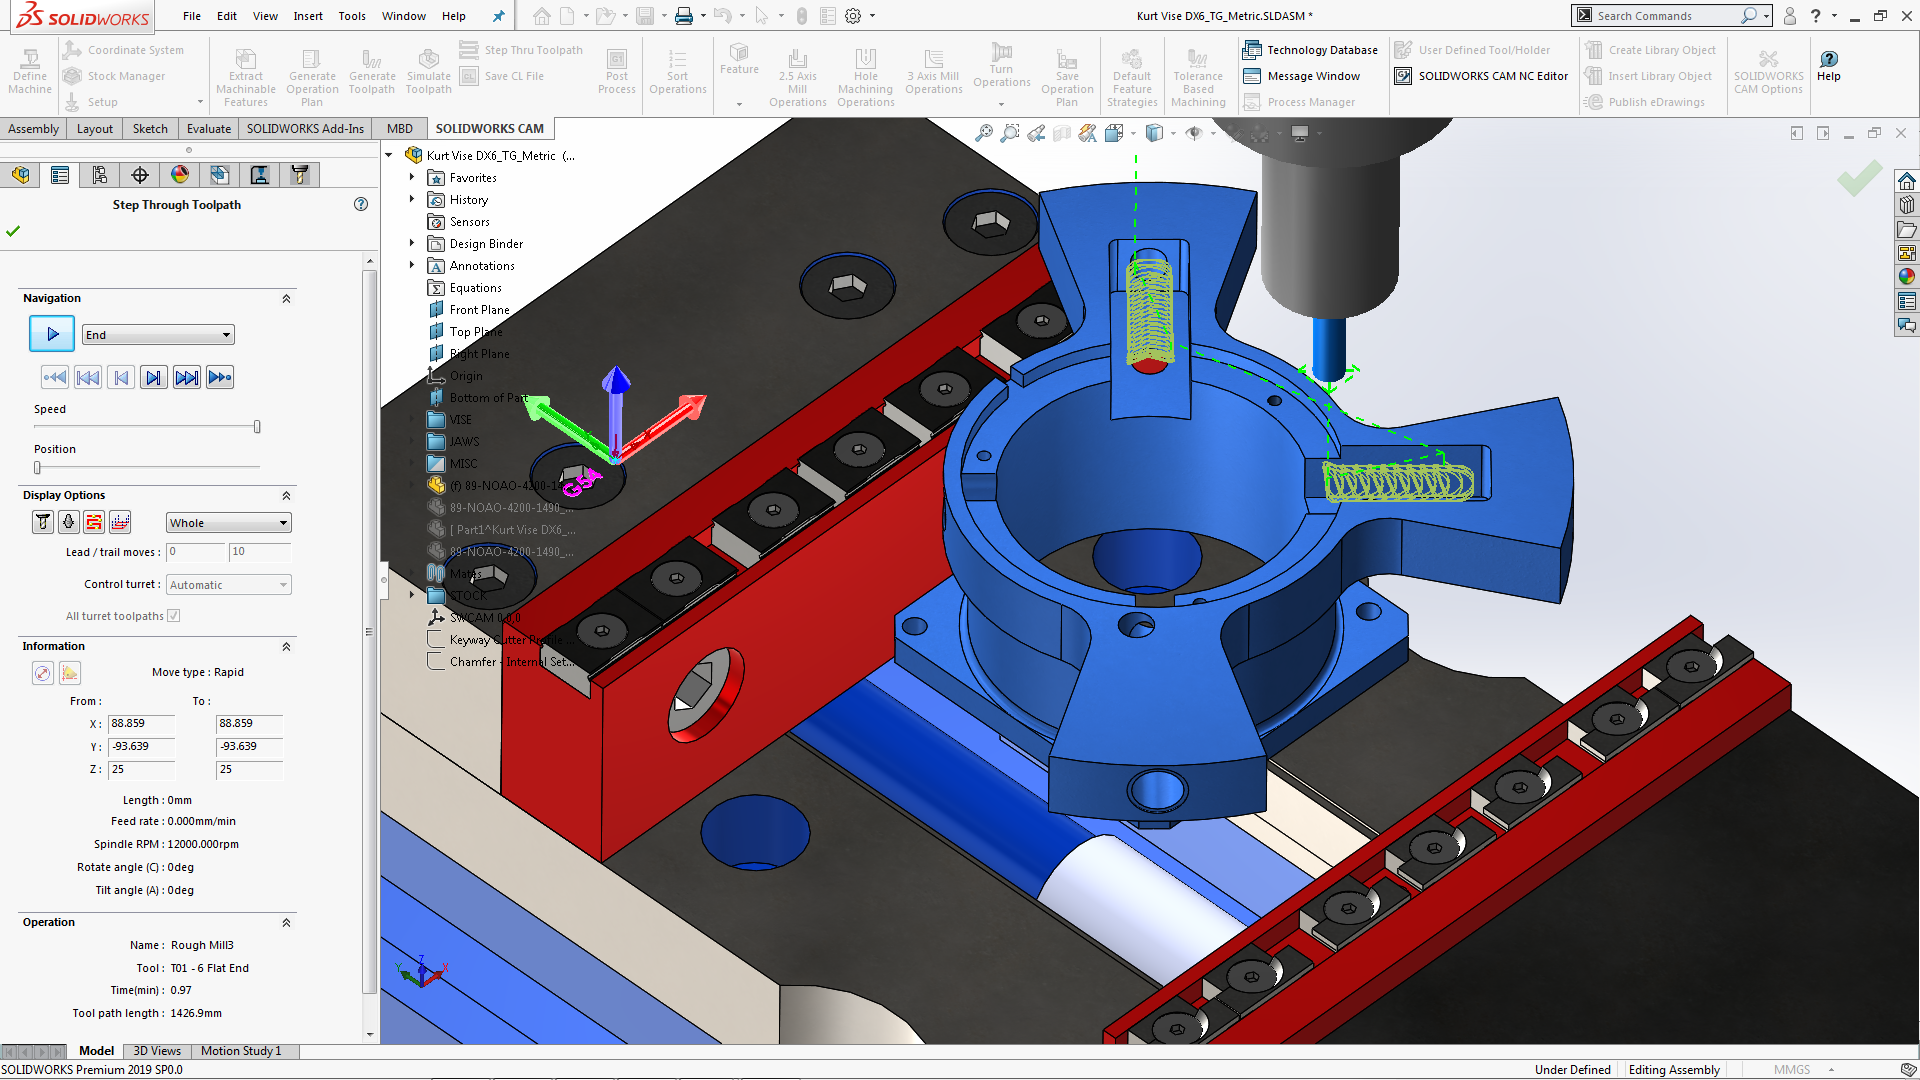 solidworks cam professional download